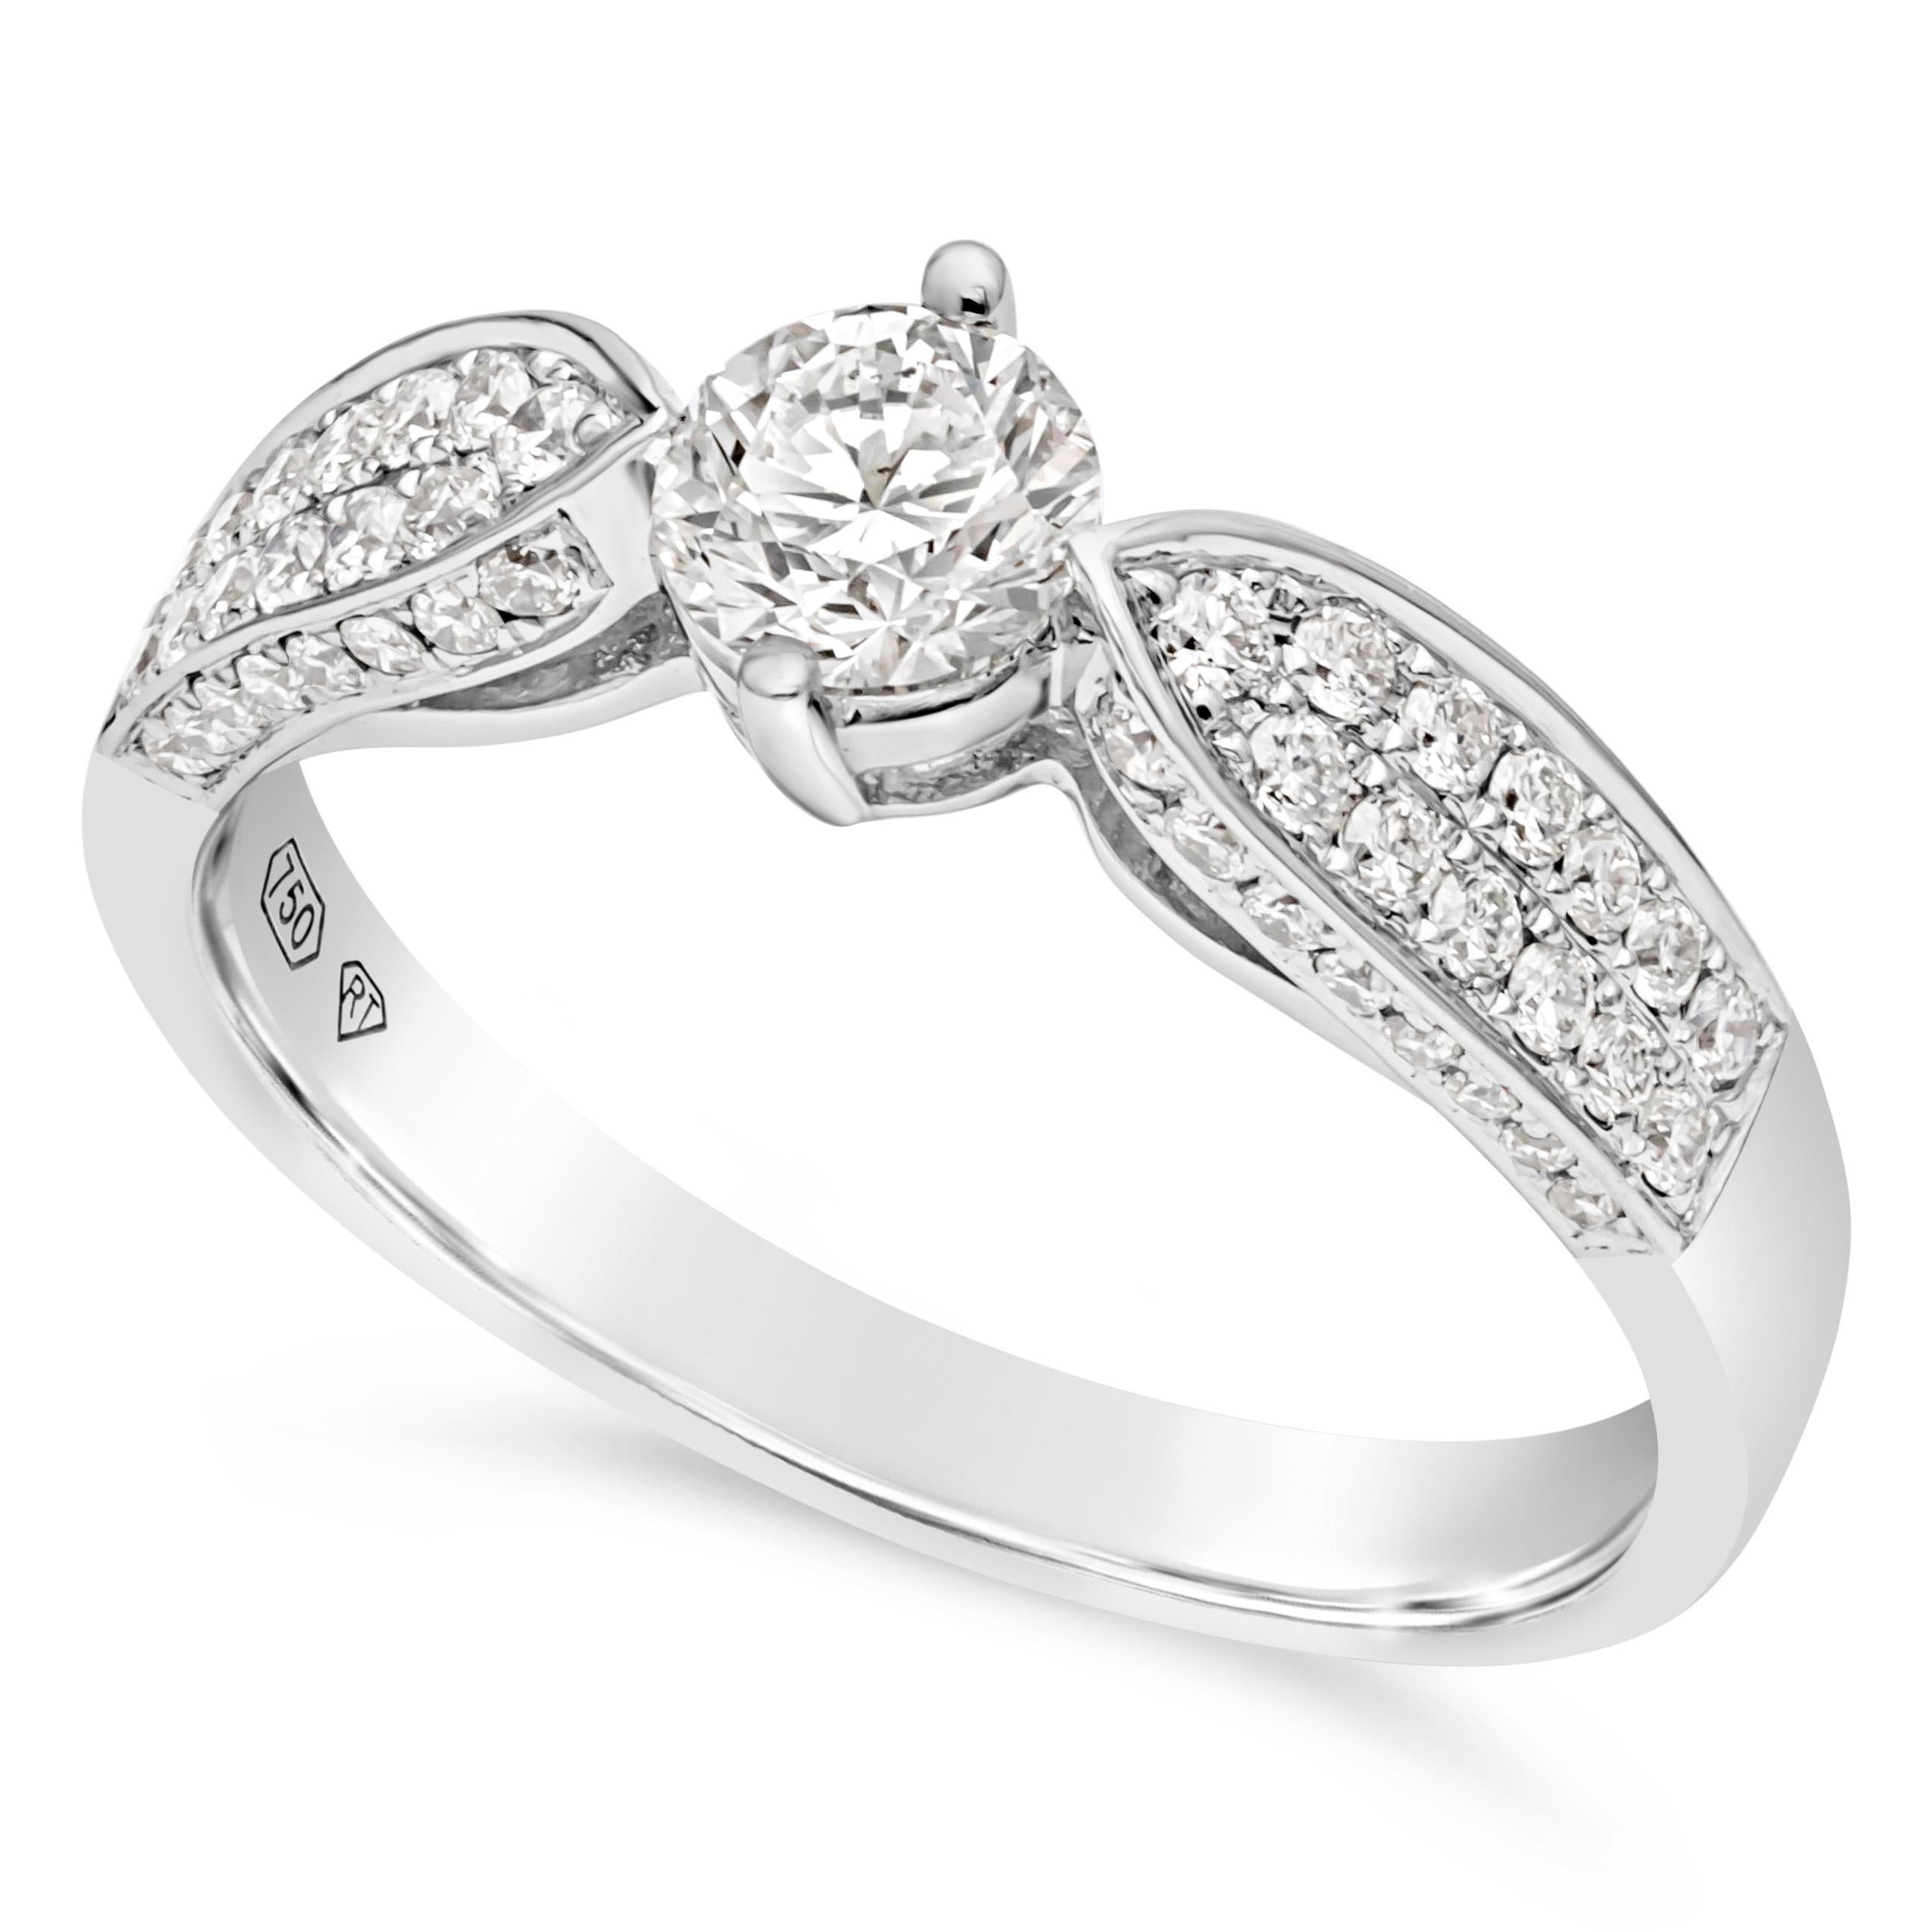 Women's Roman Malakov 0.45 Carats Round Cut Diamond Engagement Ring with Side Stones For Sale